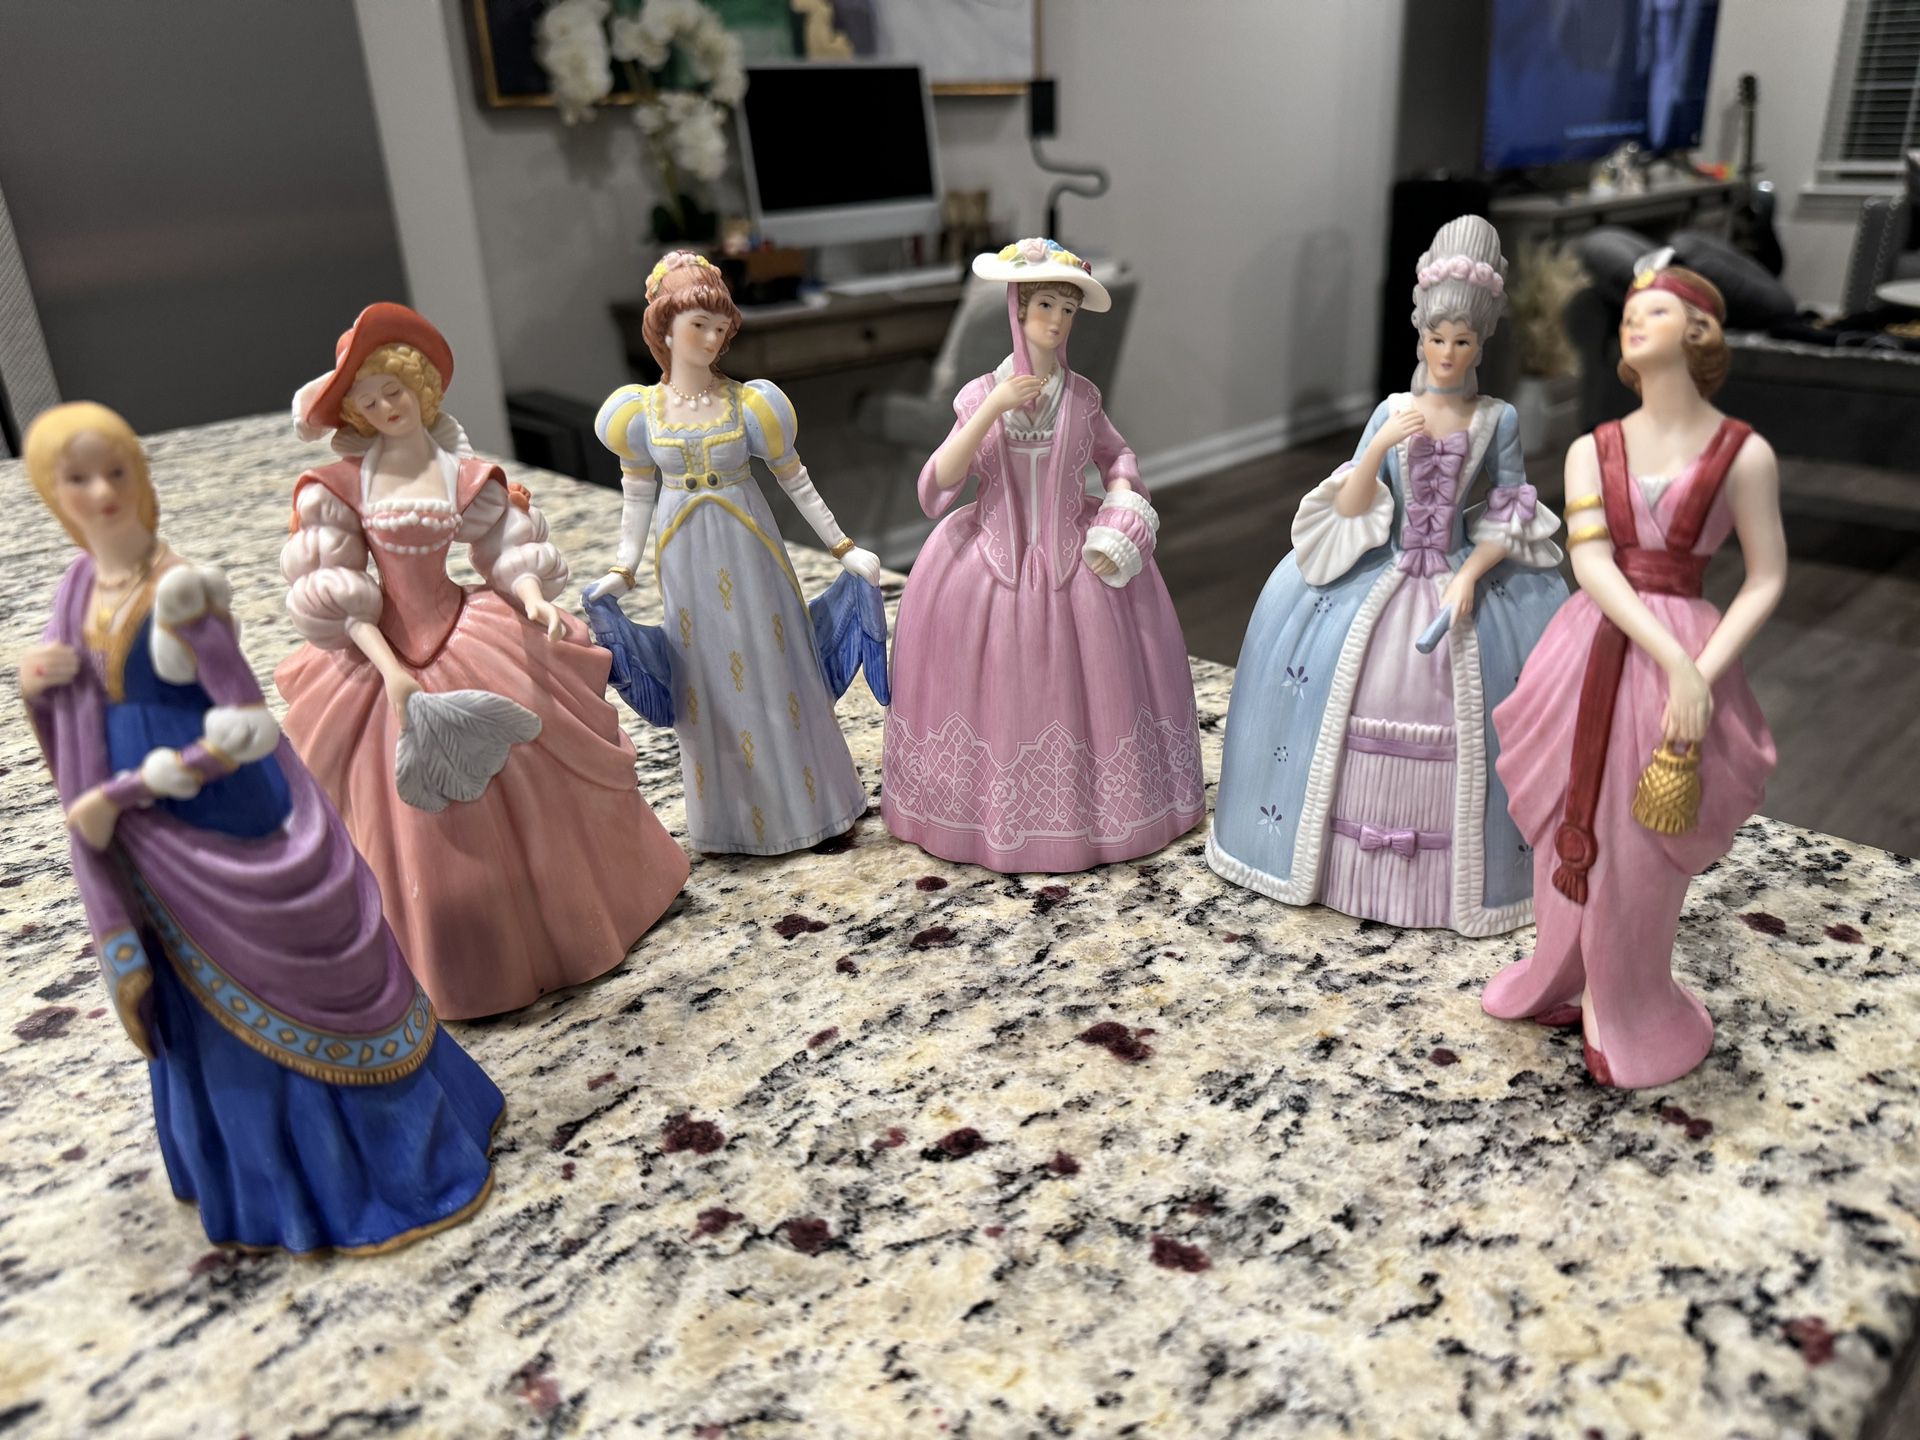 6 Lenox - Porcelain Figurines (6”tall)  Collectible Figurines